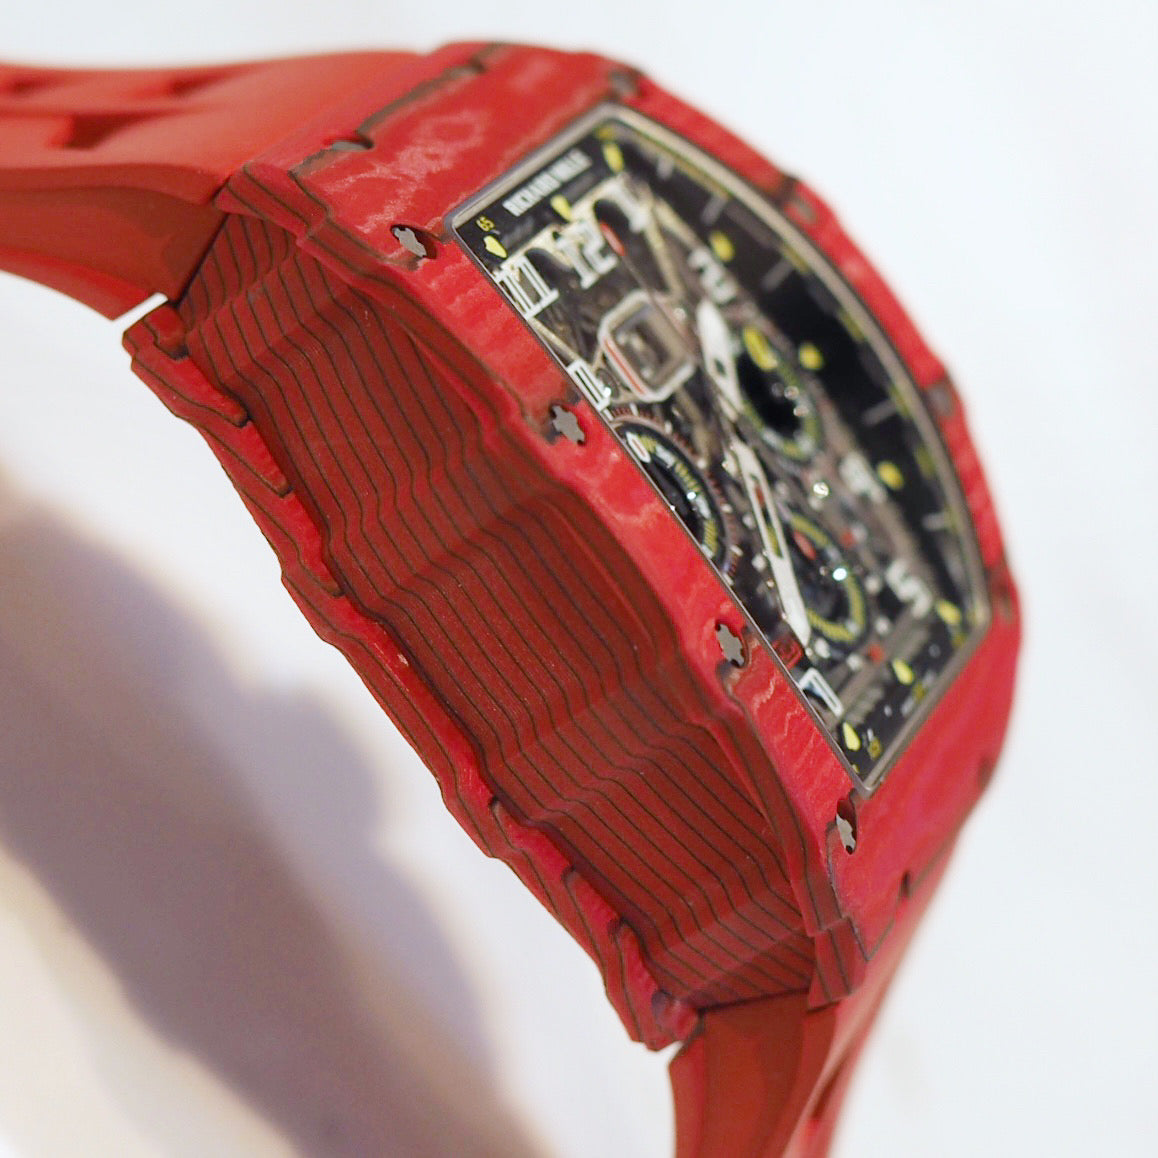 RM11-03 Automatic Flyback Chronograph Red  Richard Mille - 株式会社アート